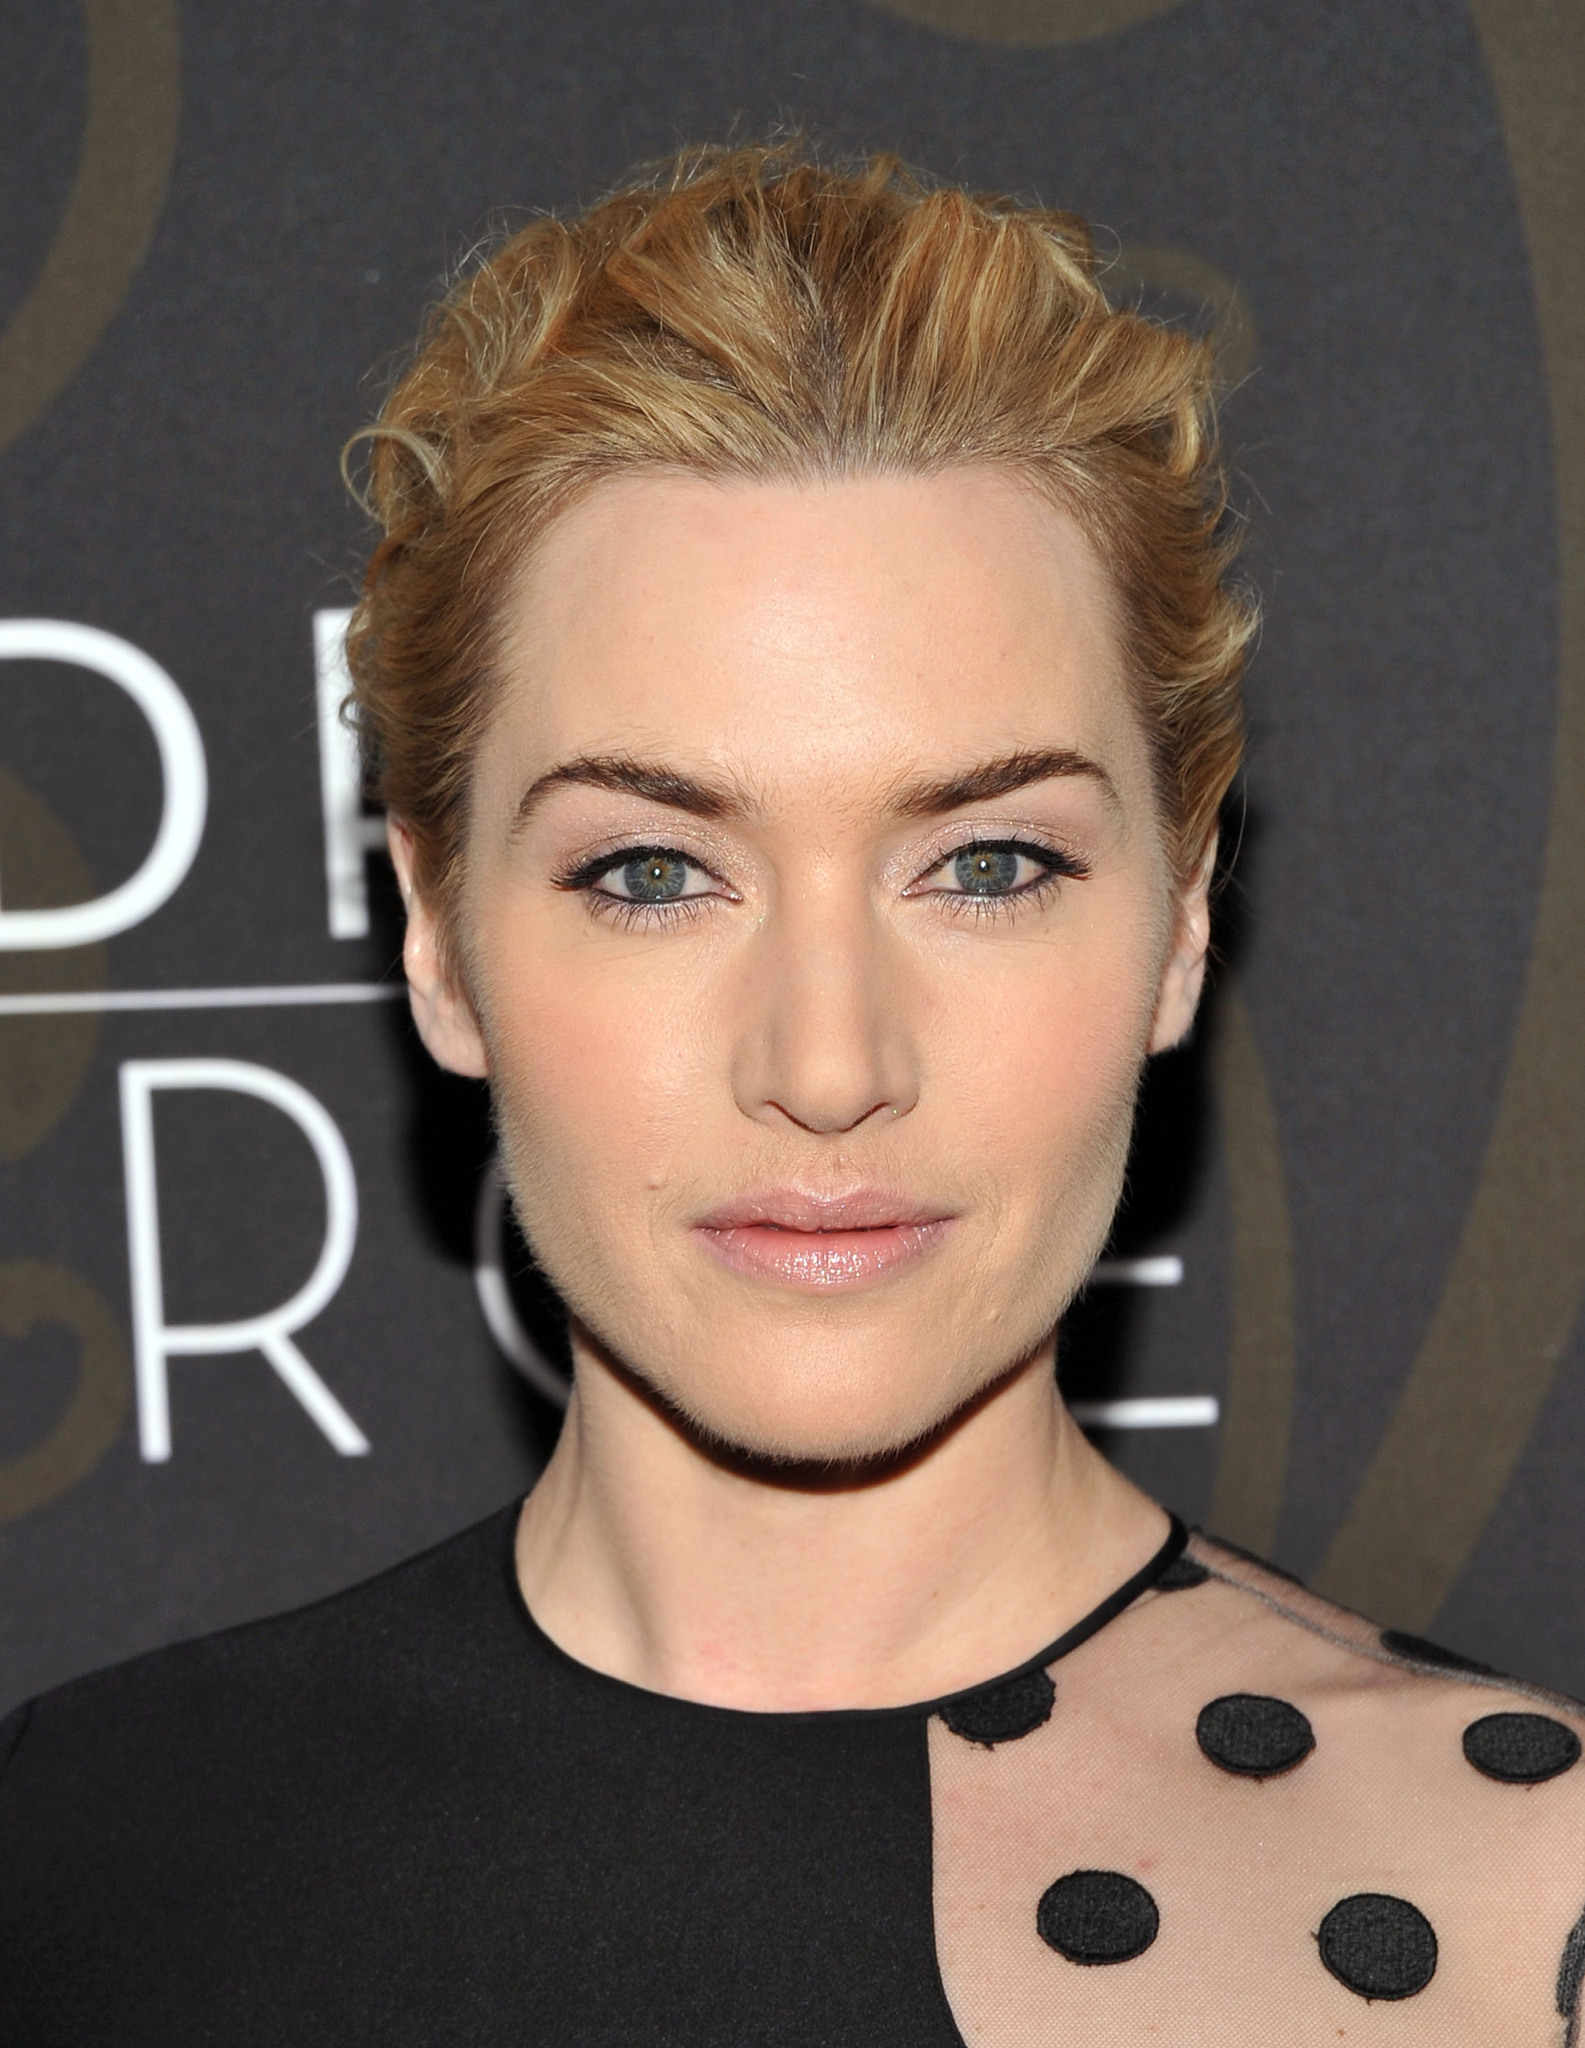 Kate Winslet at event of Mildred Pierce (2011)